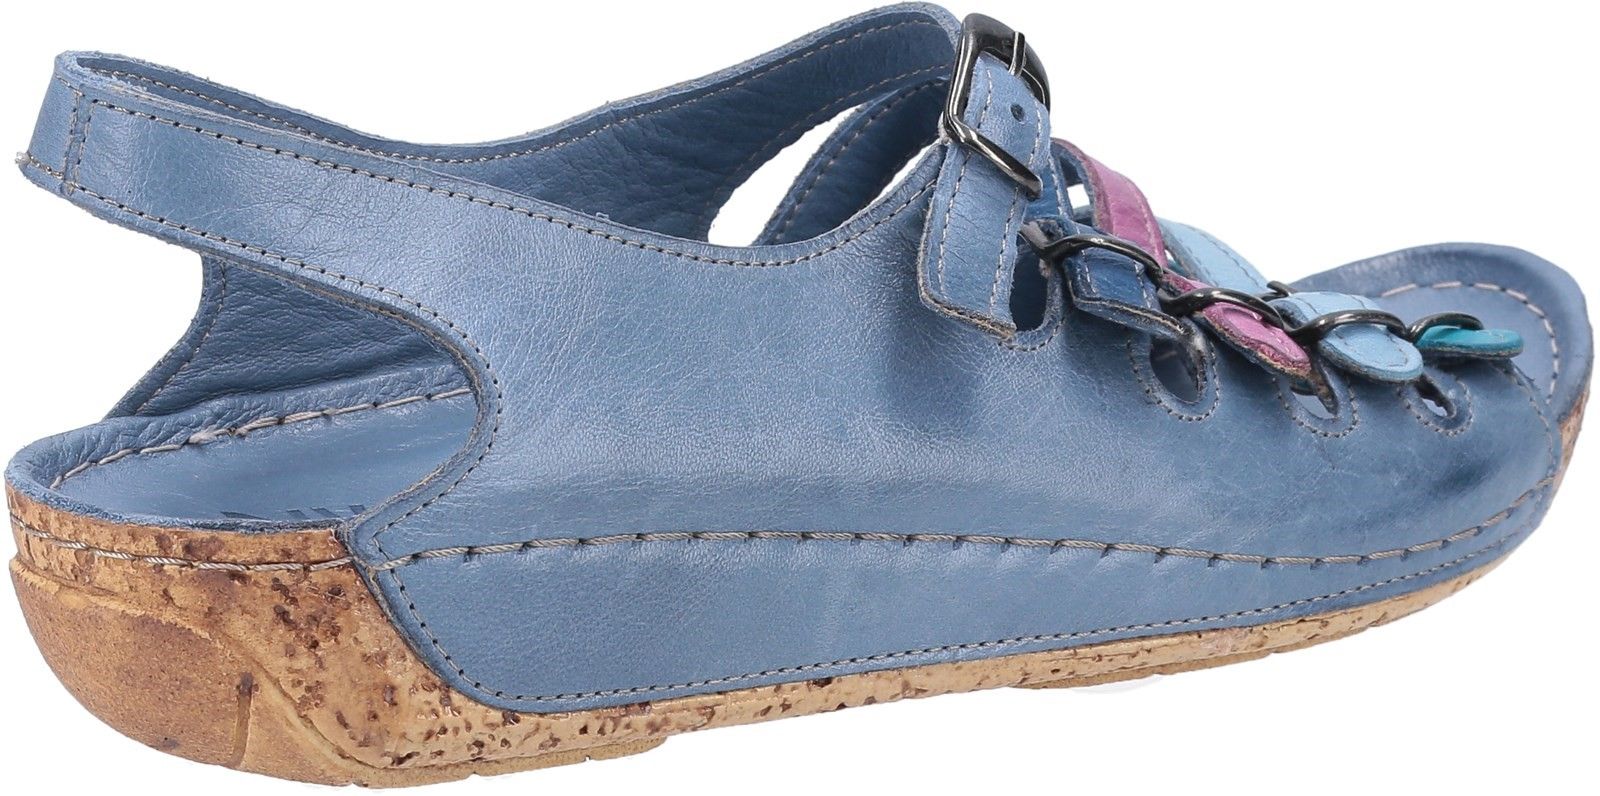 Elegant casual open toe sandal smooth leather uppers. Five adjustable multicoloured buckle straps and a lightweight cork wedge heel providing comfort and style. Open back and toe sandal. 
Lightweight cork sole unit. 
Five adjustable coloured straps.